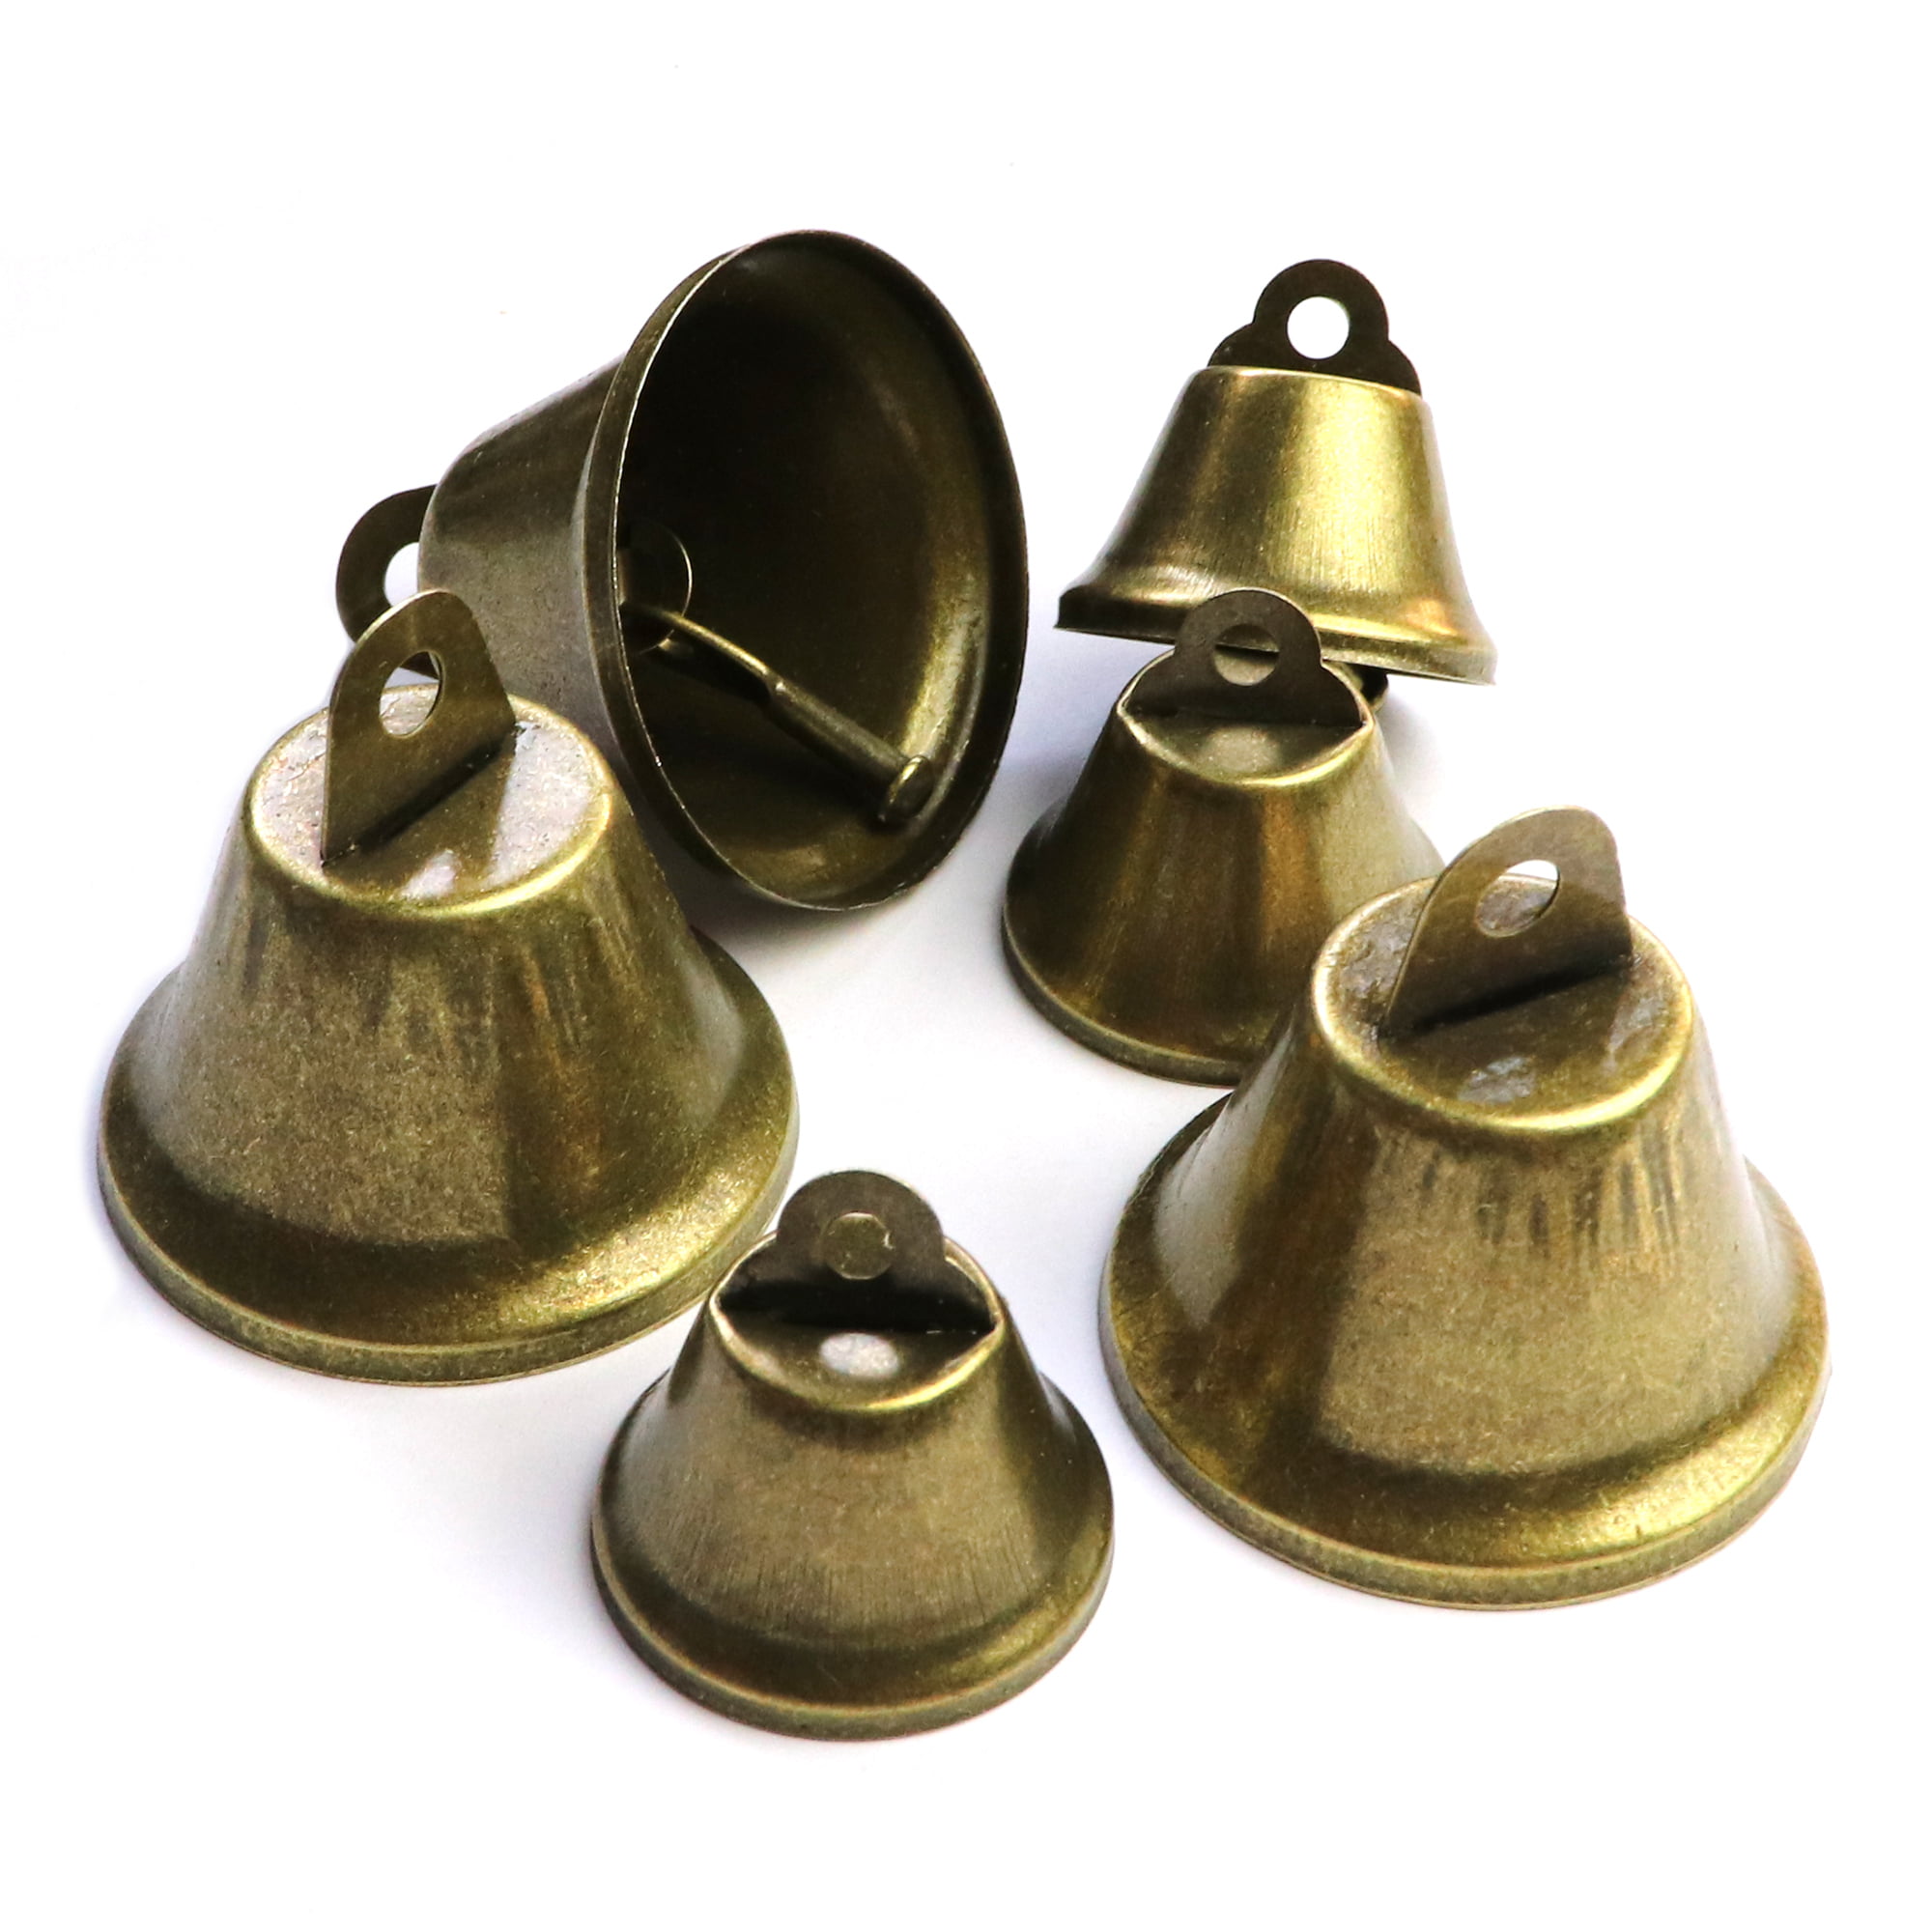 Making Wind Chimes,Christmas Bell Housebreaking 25 Pieces Markeny Vintage Bronze Jingle Bells for Dog Potty Training 